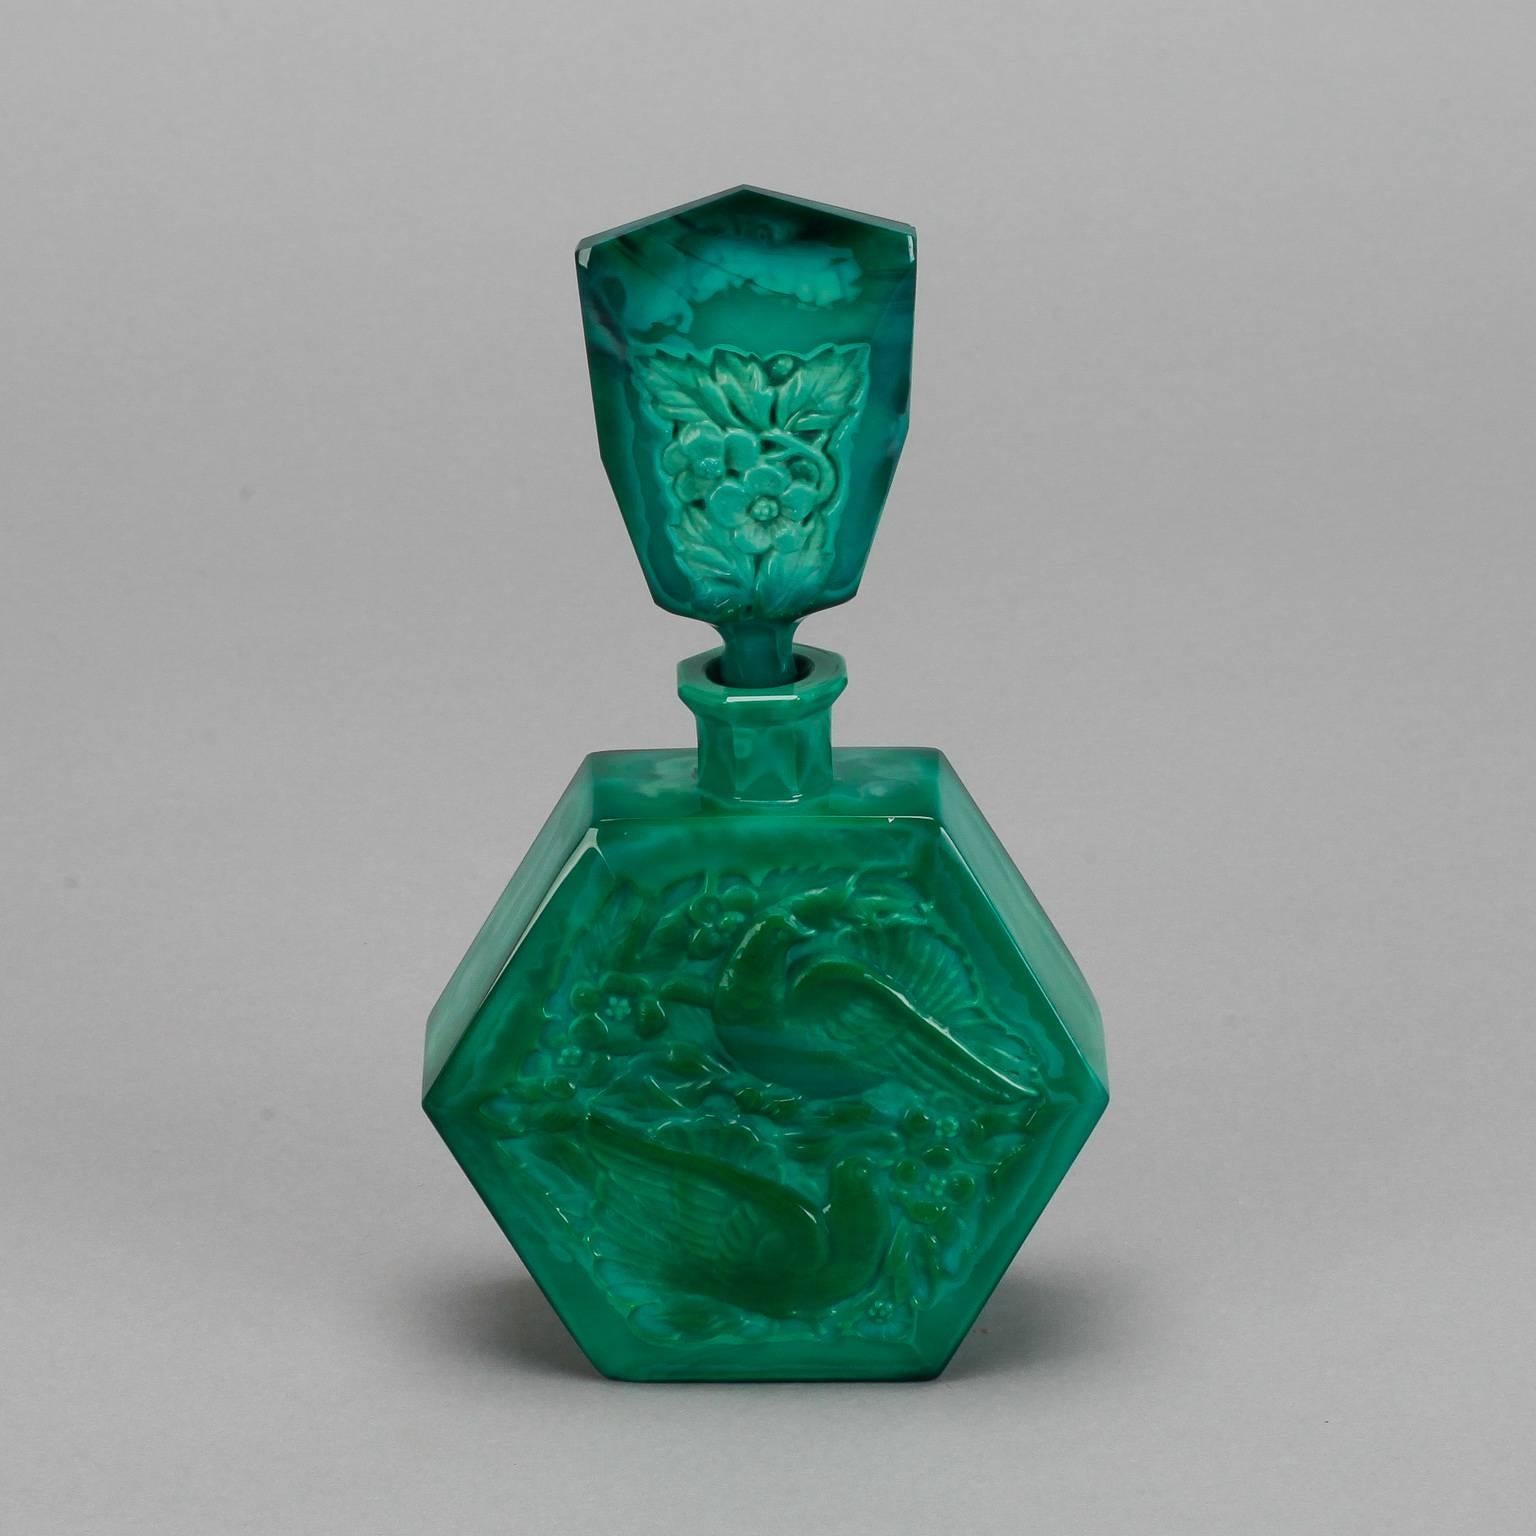 Circa 1930s Czech malachite glass perfume bottle known as the Love Bird model from the Ingrid line manufactured by Curt Schlevogt Co. The bottle features two birds on the bottle body and floral decorations on the stopper. 